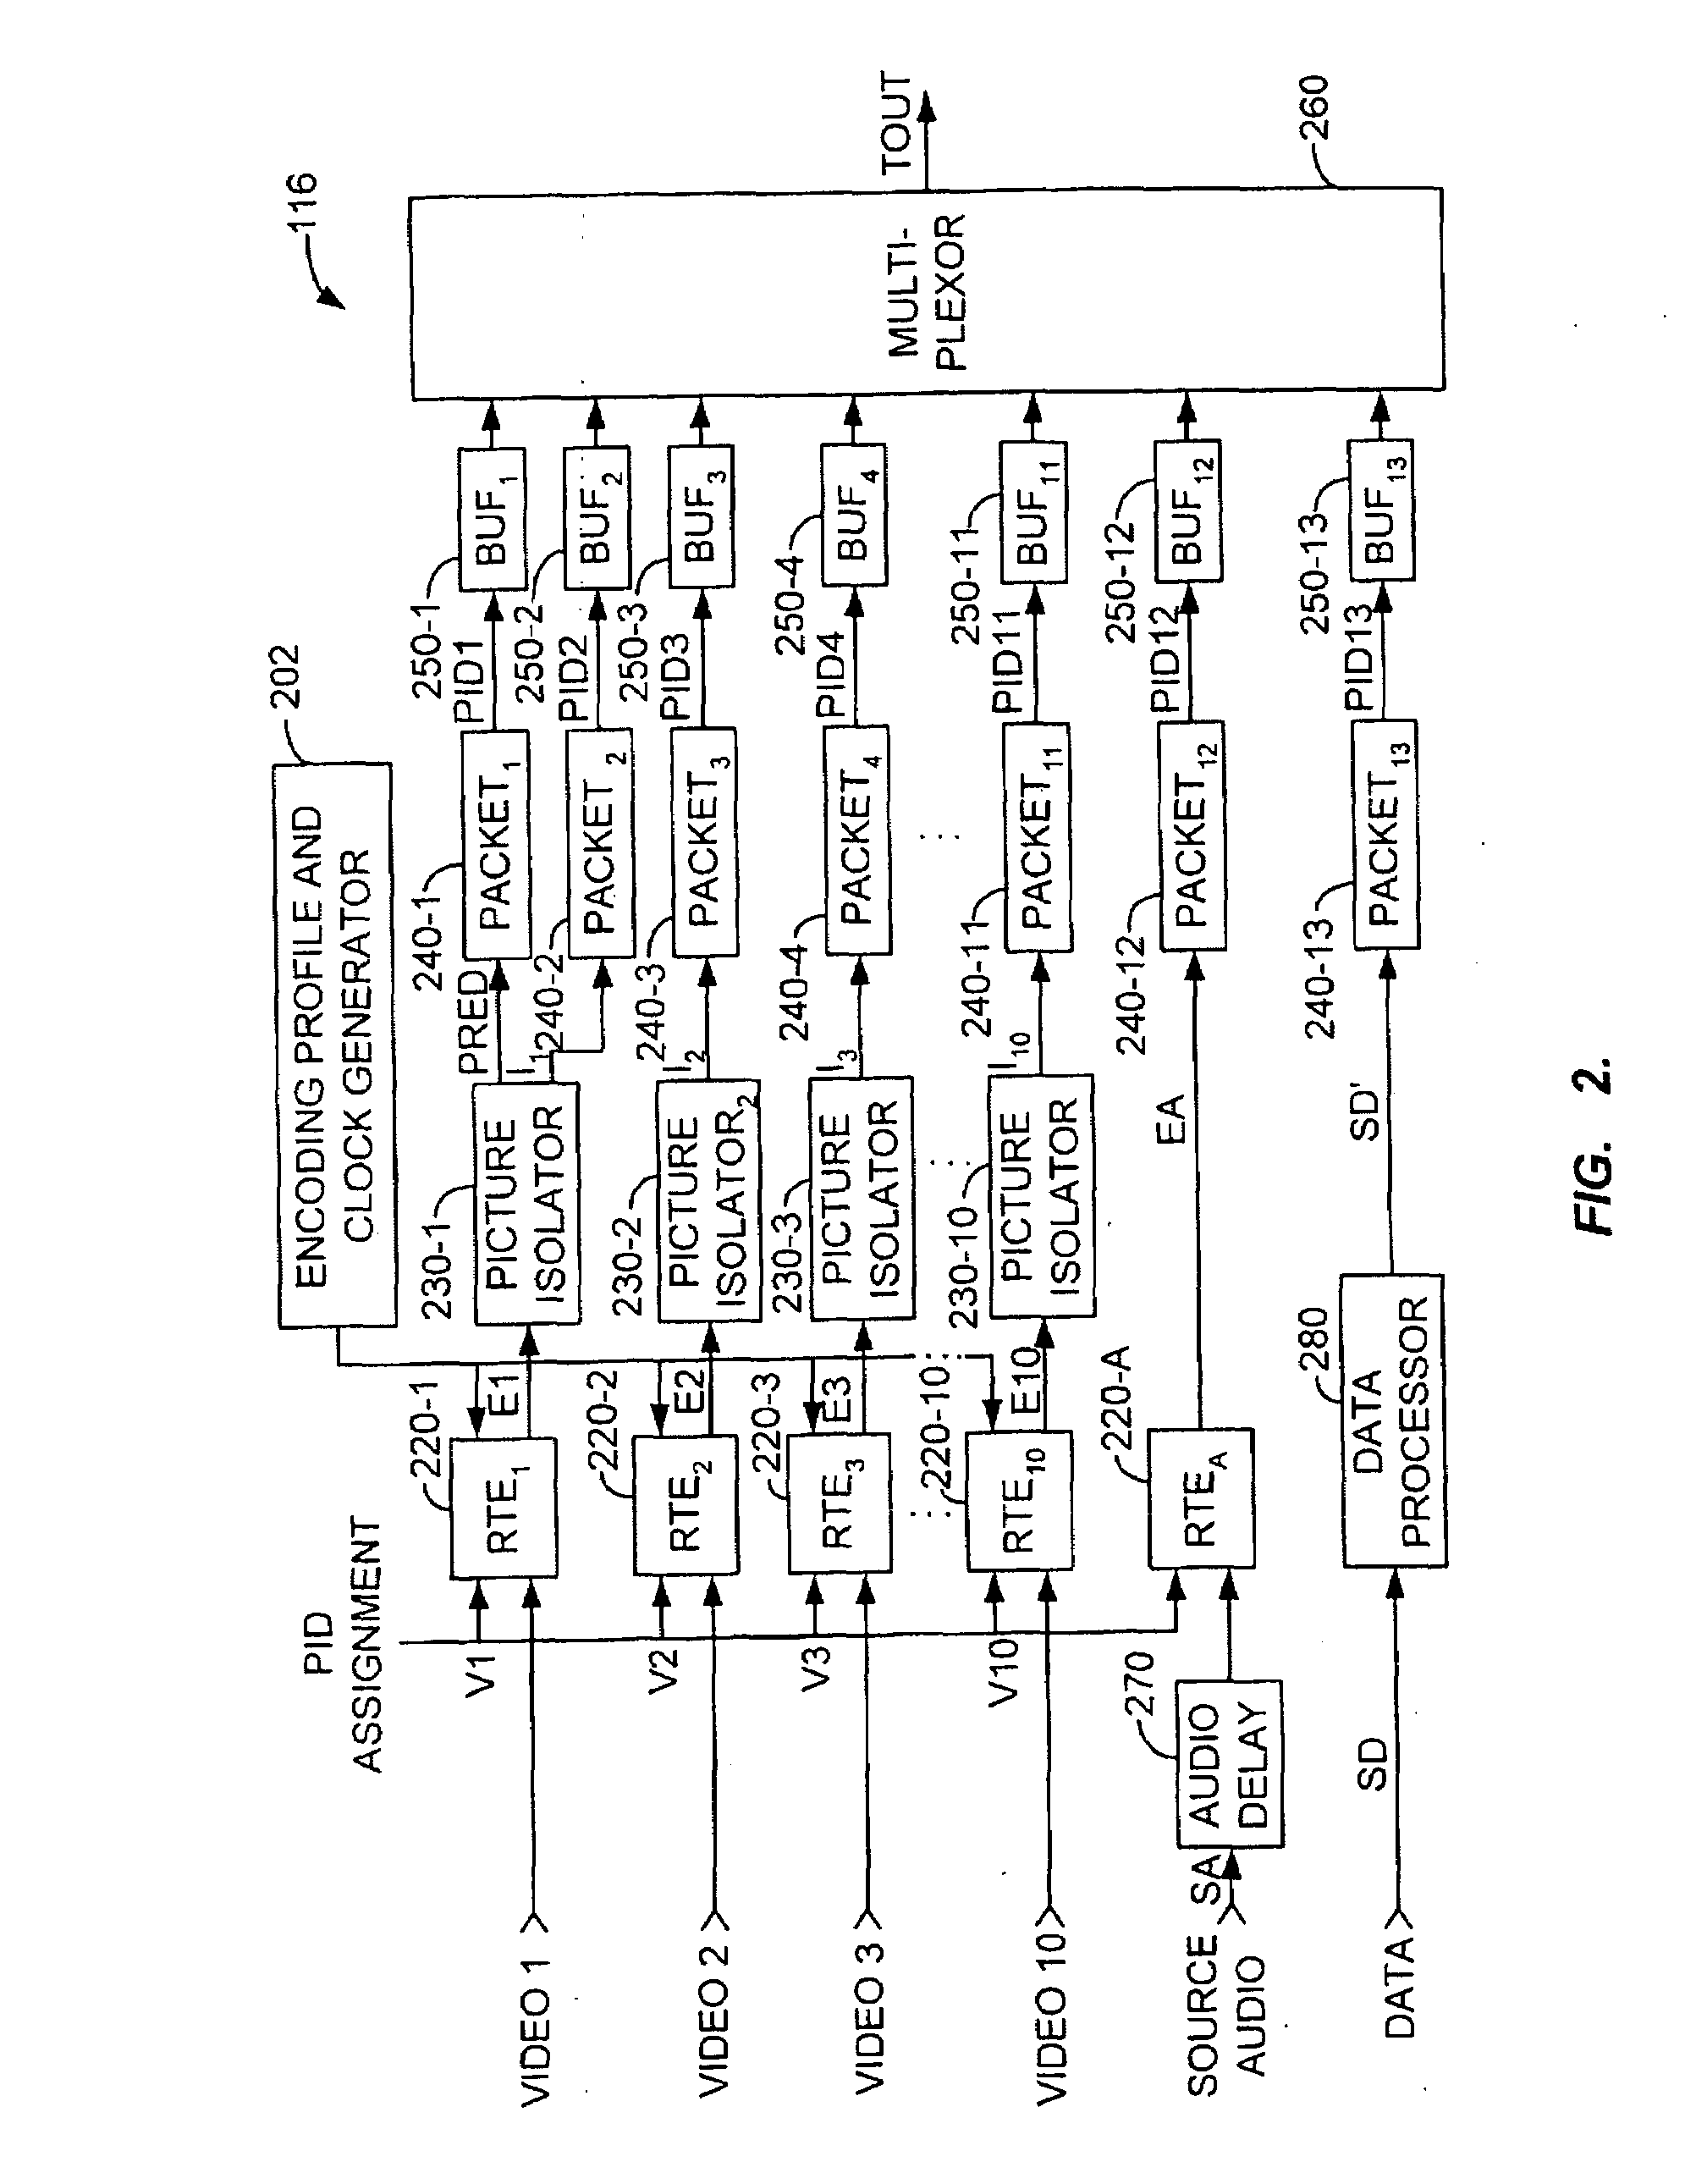 Method and Apparatus for Compressing Video Sequences